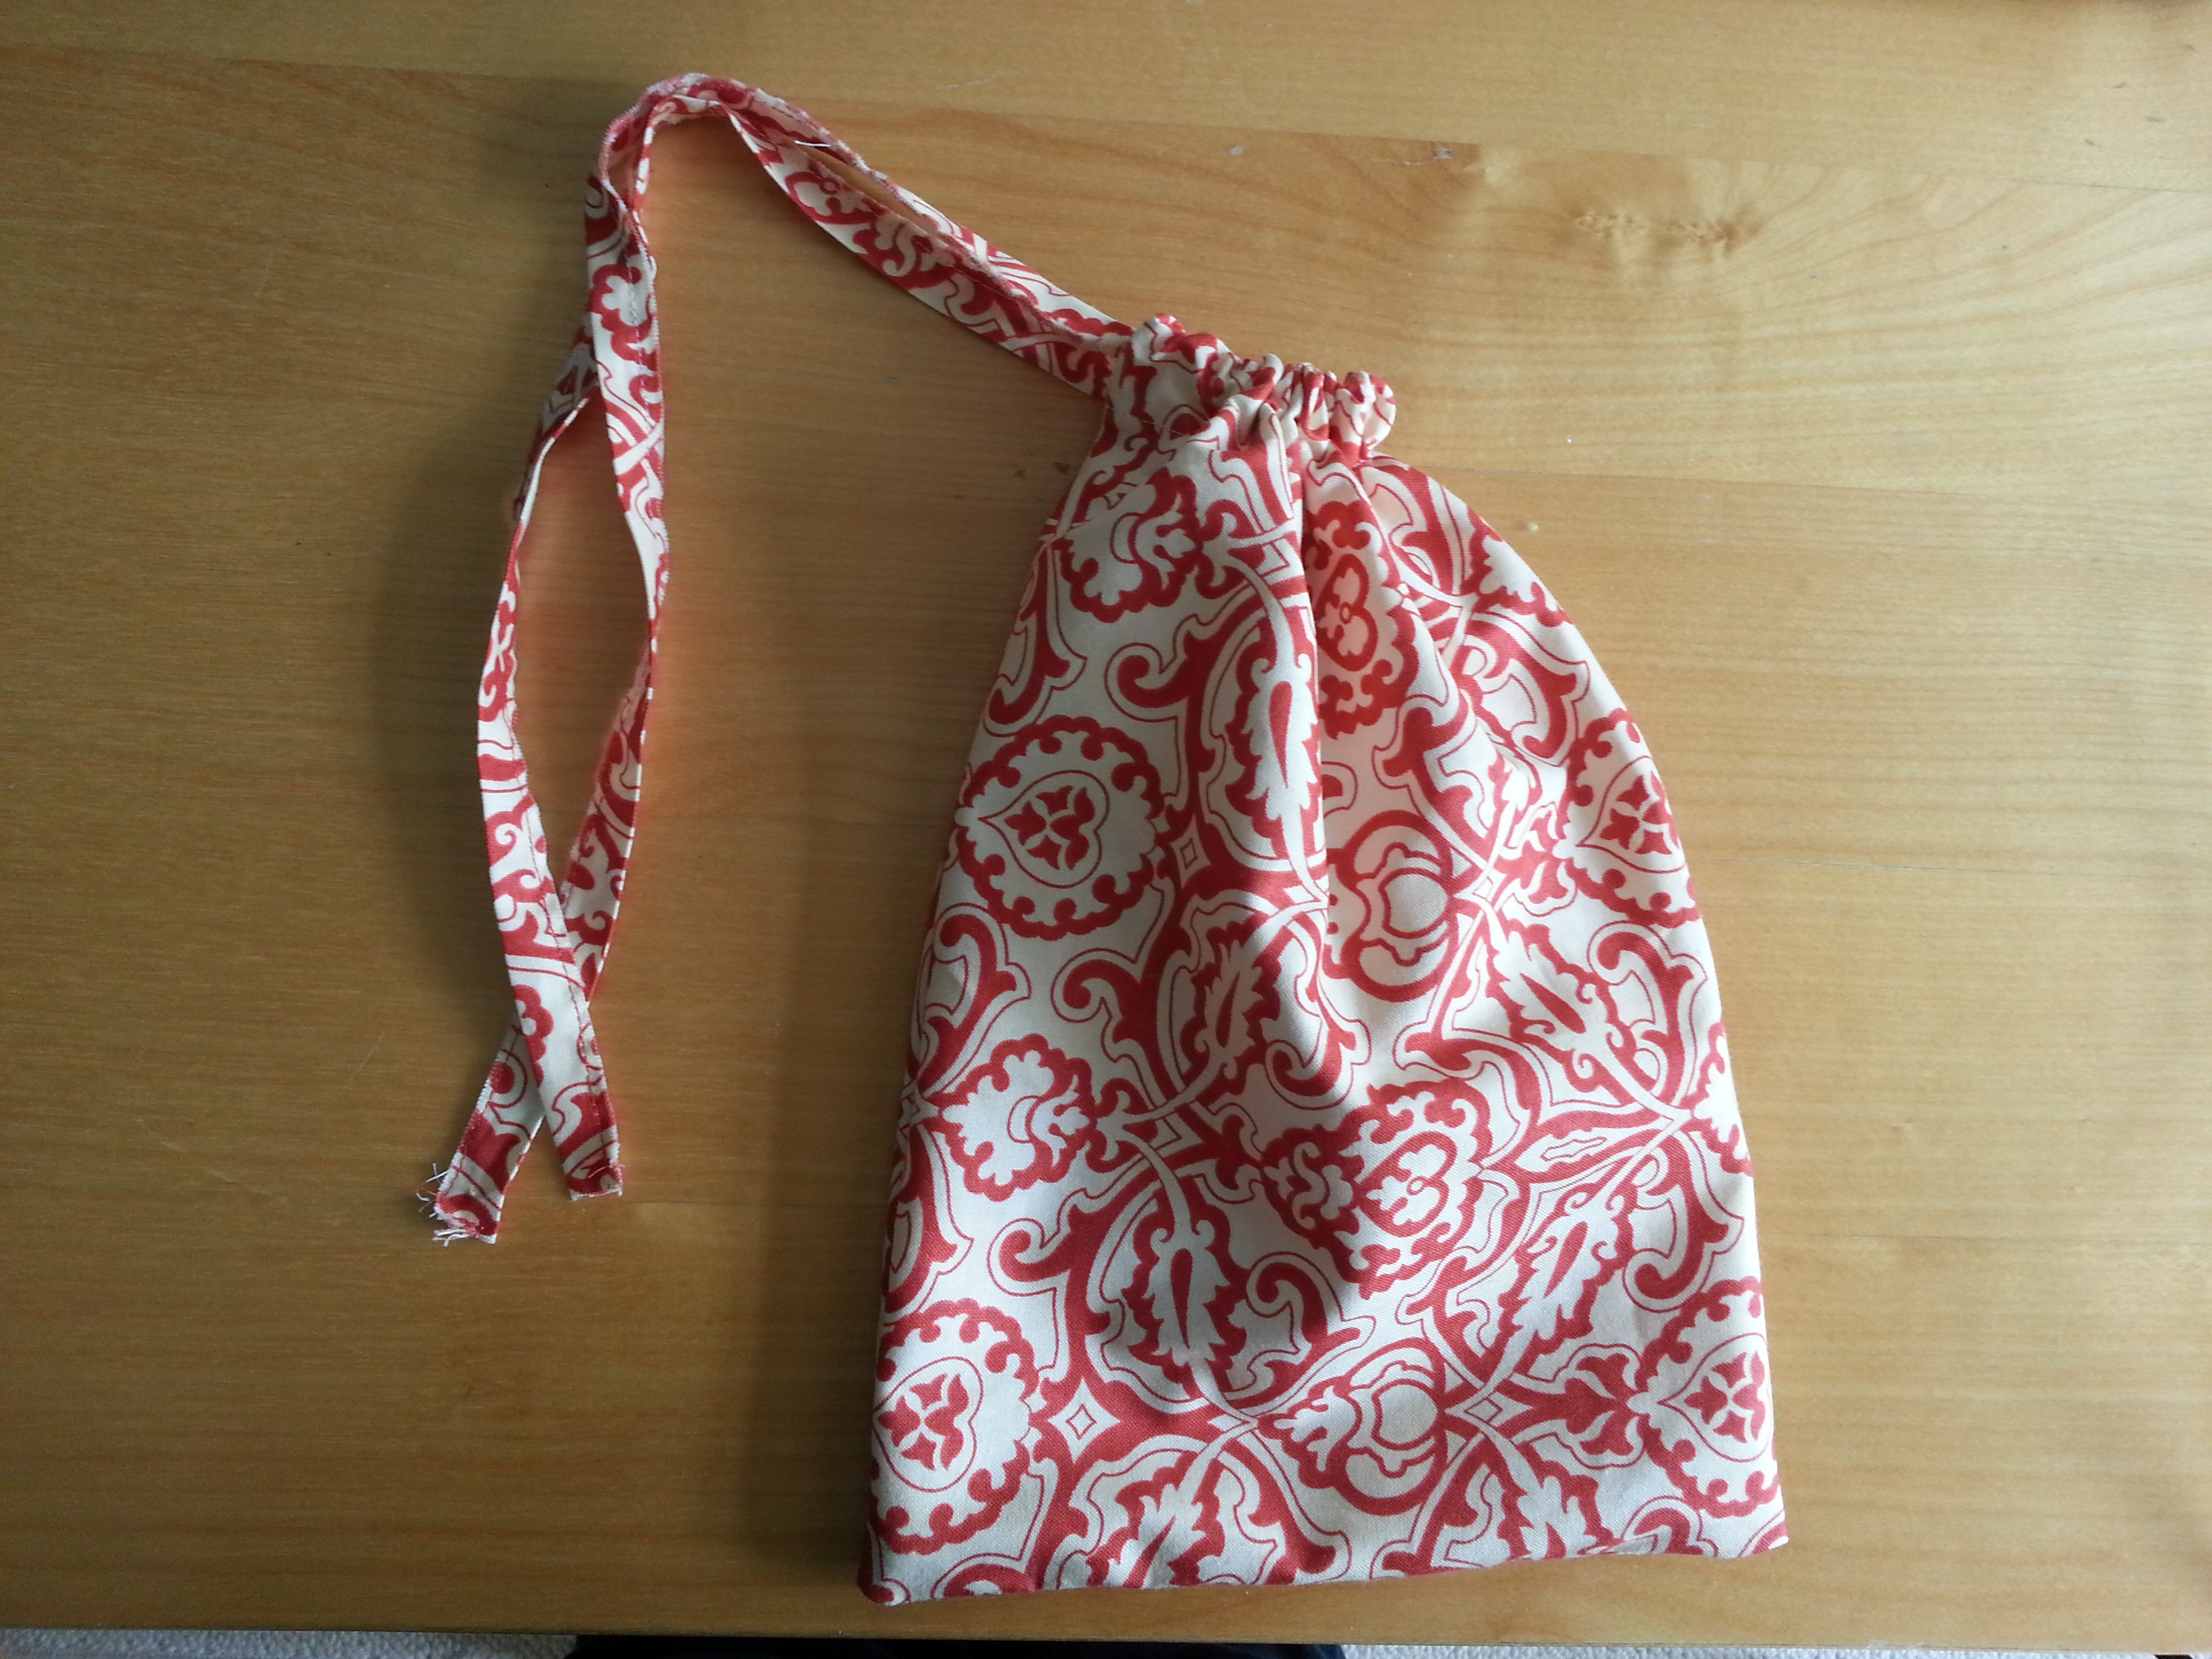 Simple Drawstring Bag - First project. – Sewing Projects | BurdaStyle.com